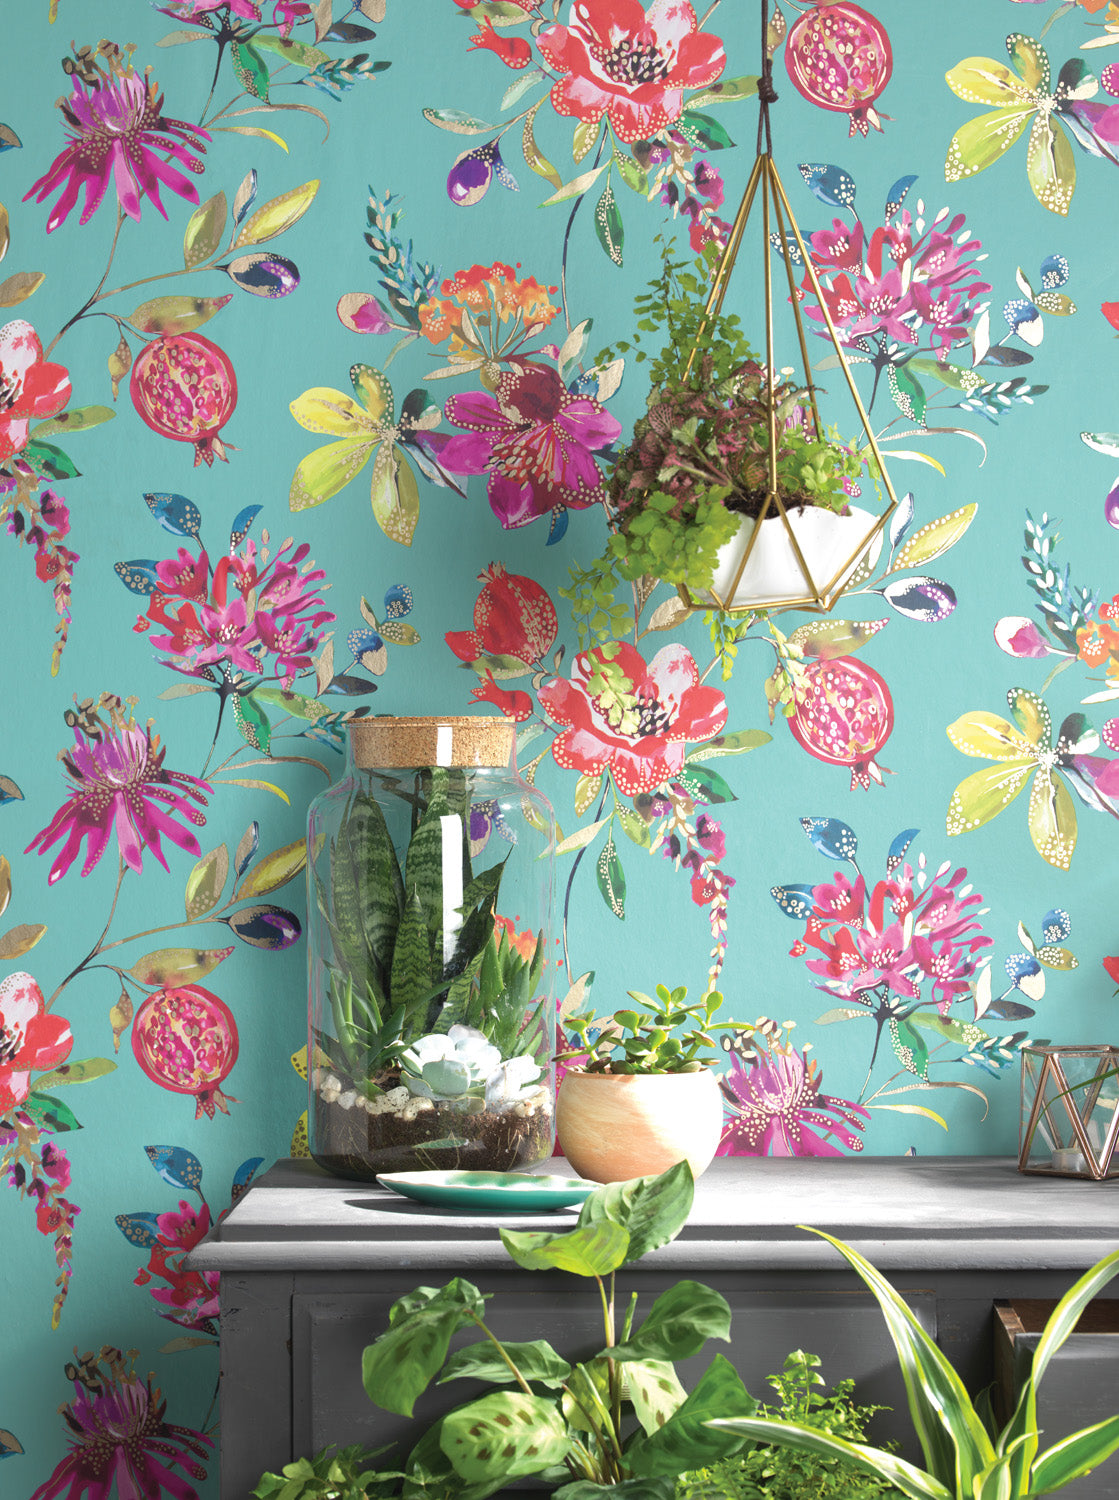 Floral Wallpaper - Flowers & fruits in grey